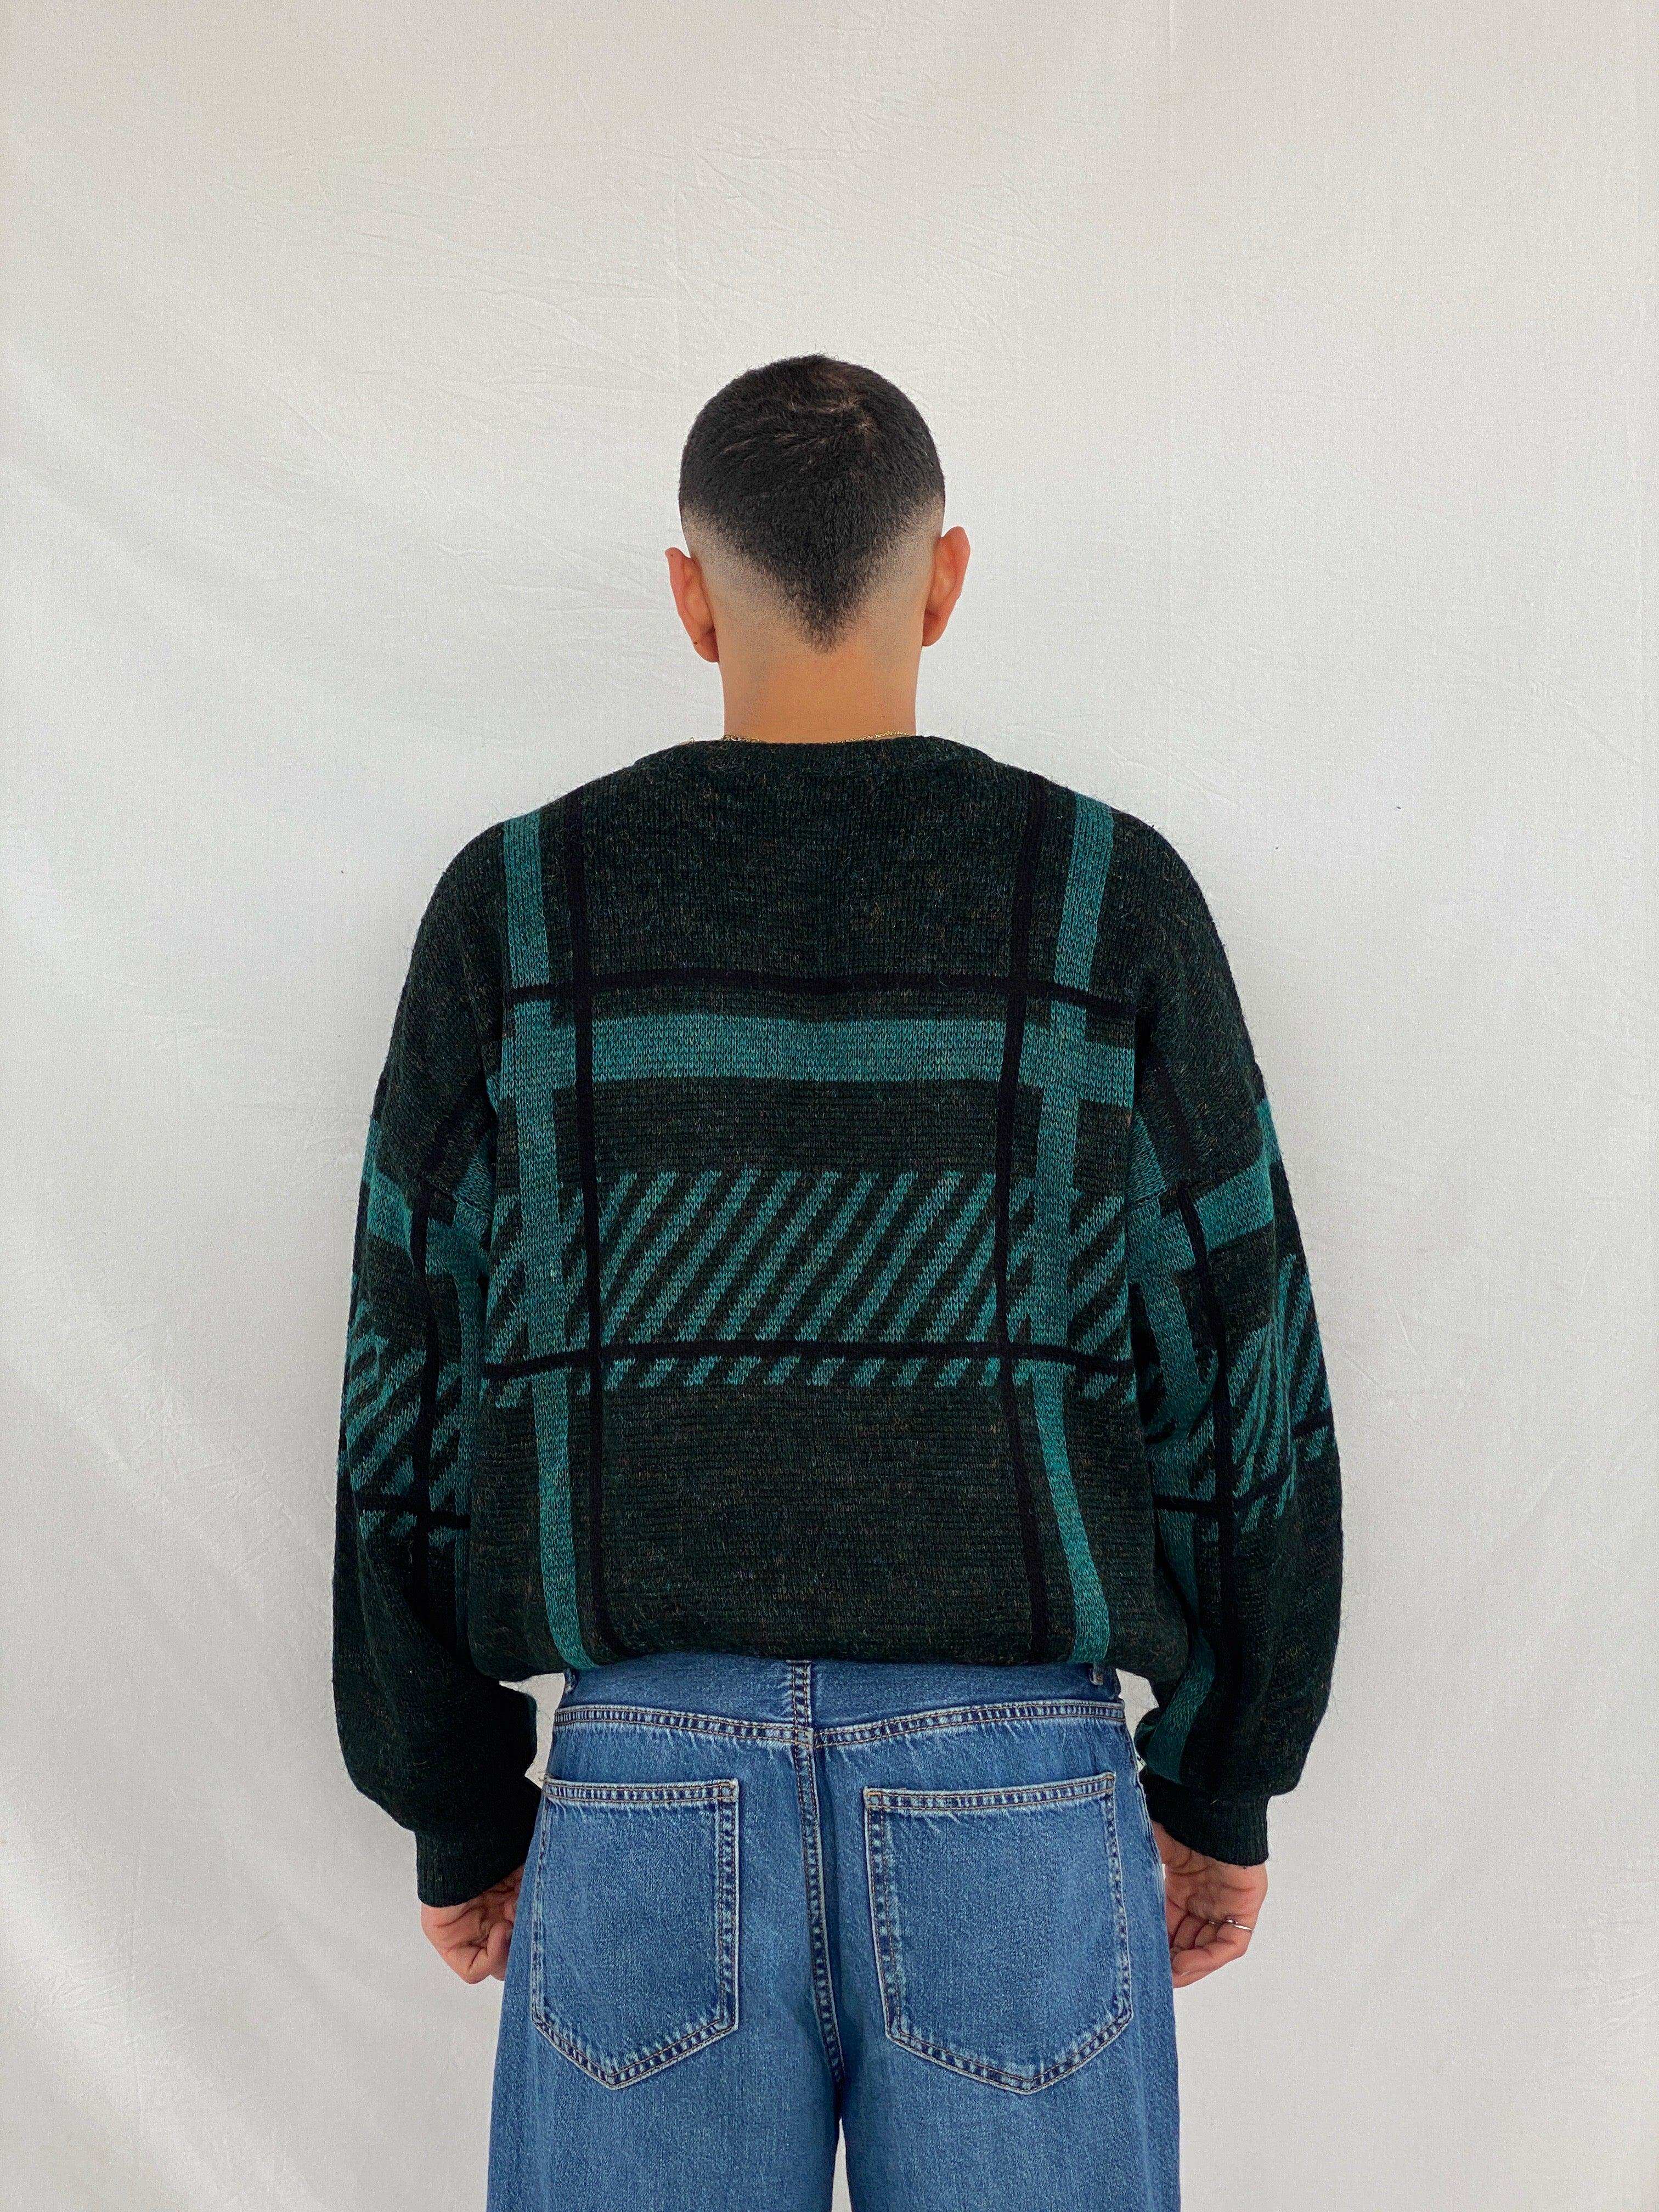 Vintage 90s Chewitt Knitted Sweater - Balagan Vintage Sweater 90s, Abdullah, knitted sweater, NEW IN, sweater, vintage sweater